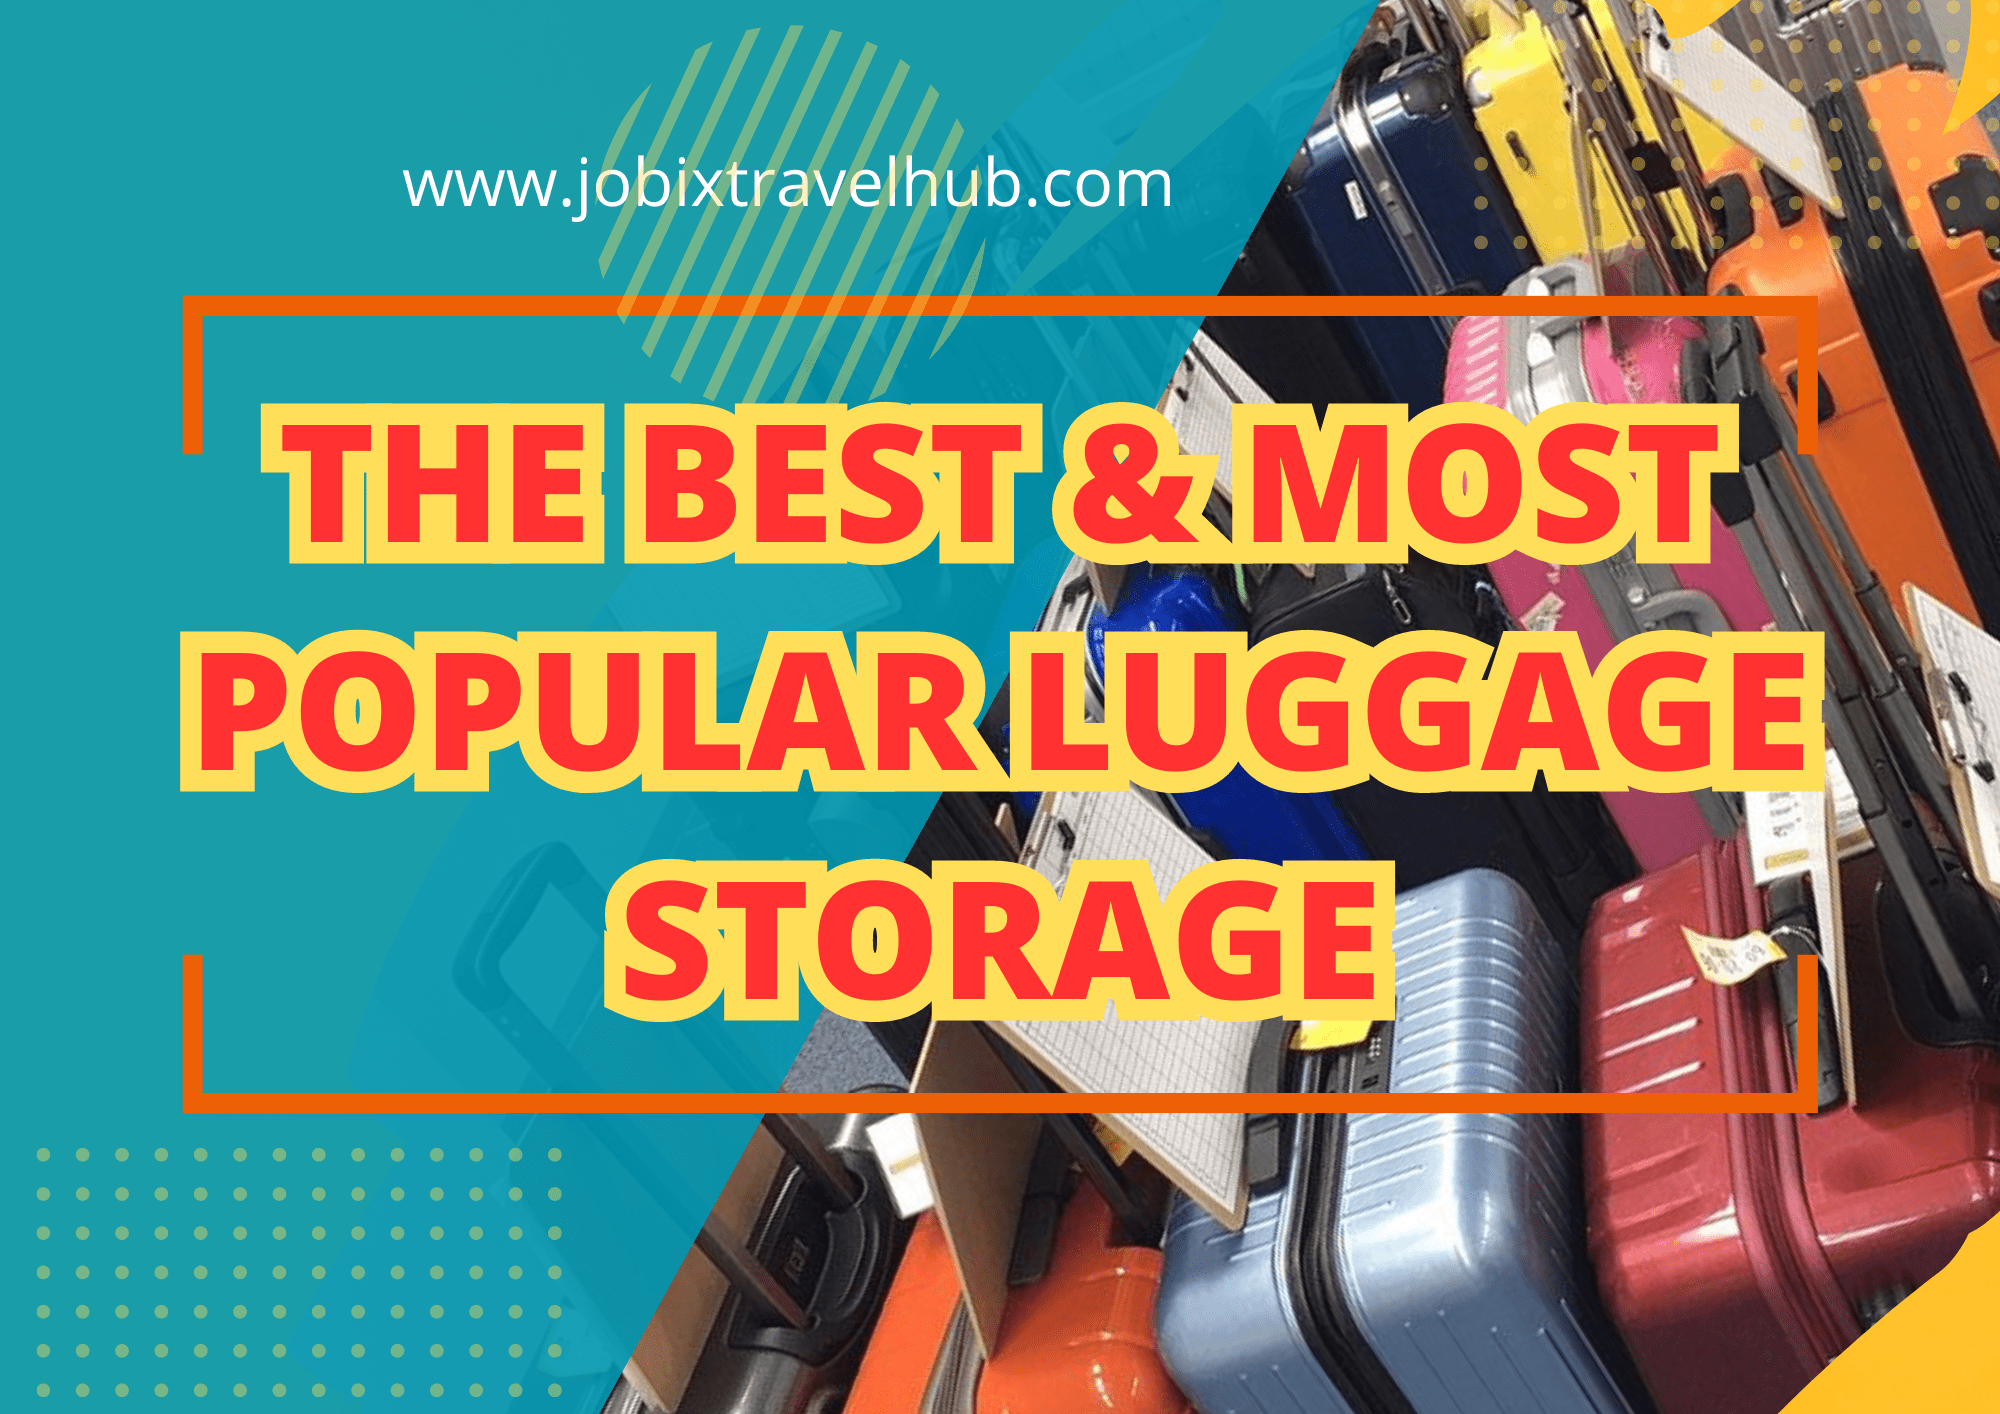 Are you heading on vacation soon? Do not let transportation and luggage storage ruin it. The best Luggage storage is here to help you.